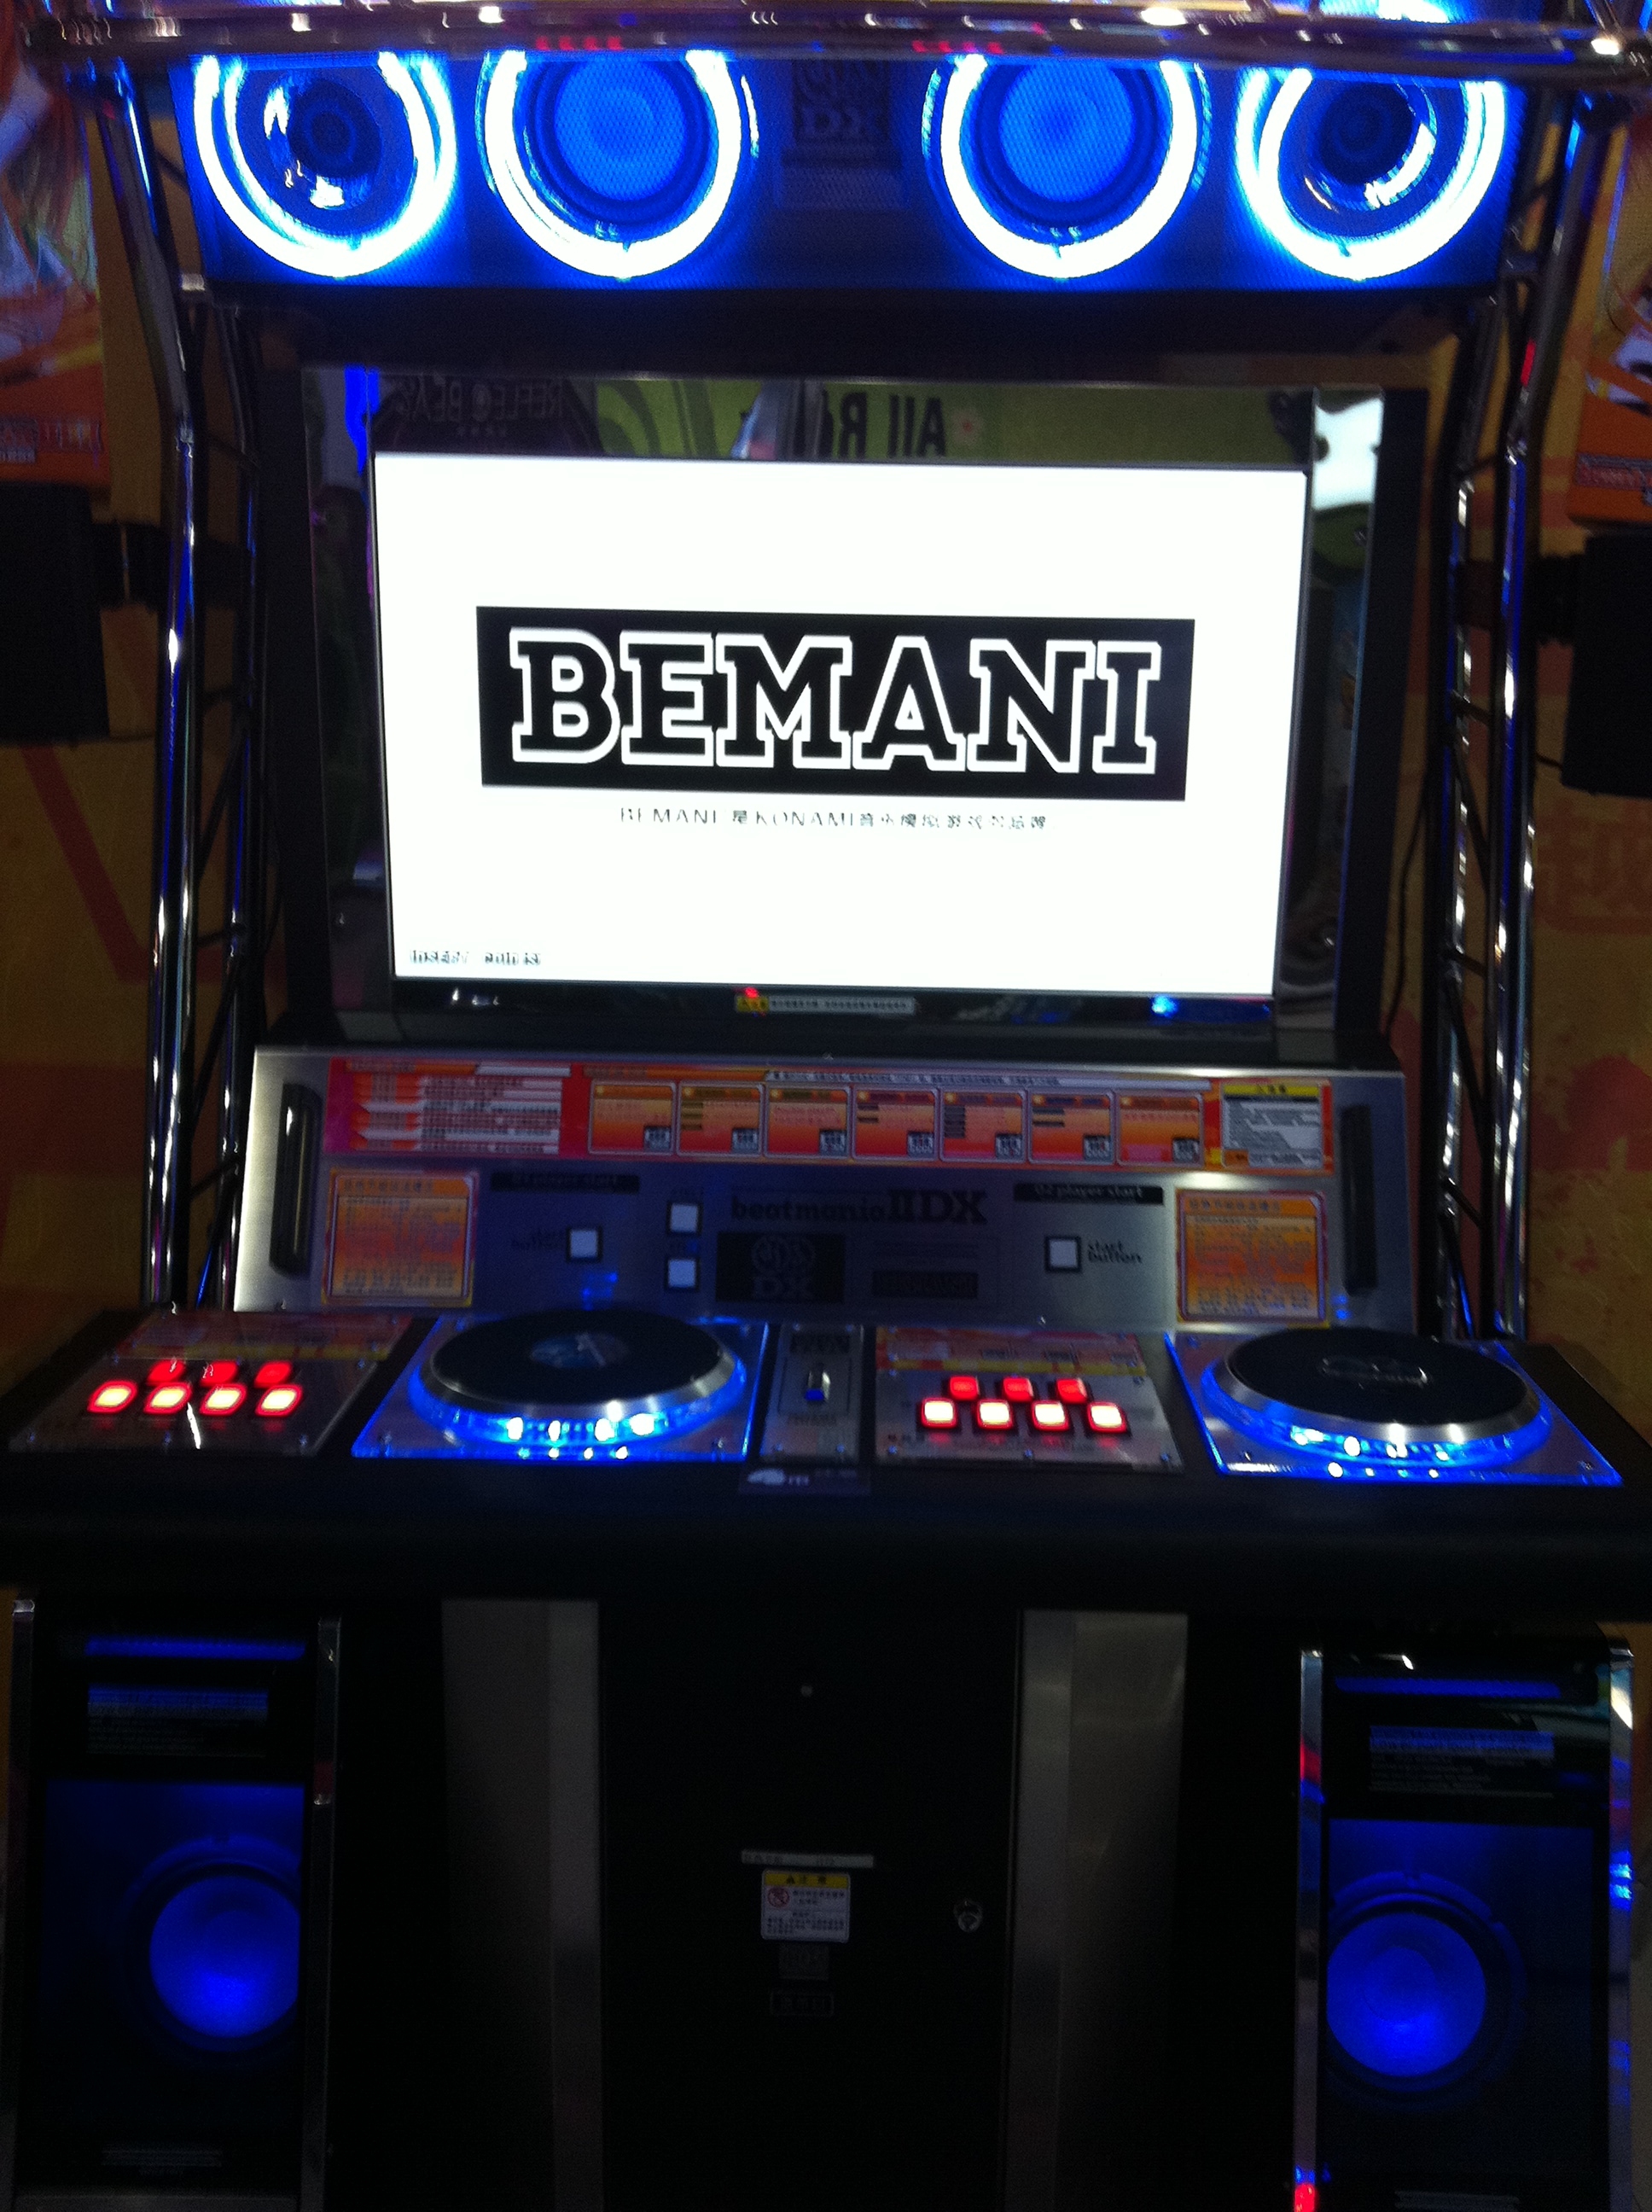 Amazing Beatmania Pictures & Backgrounds